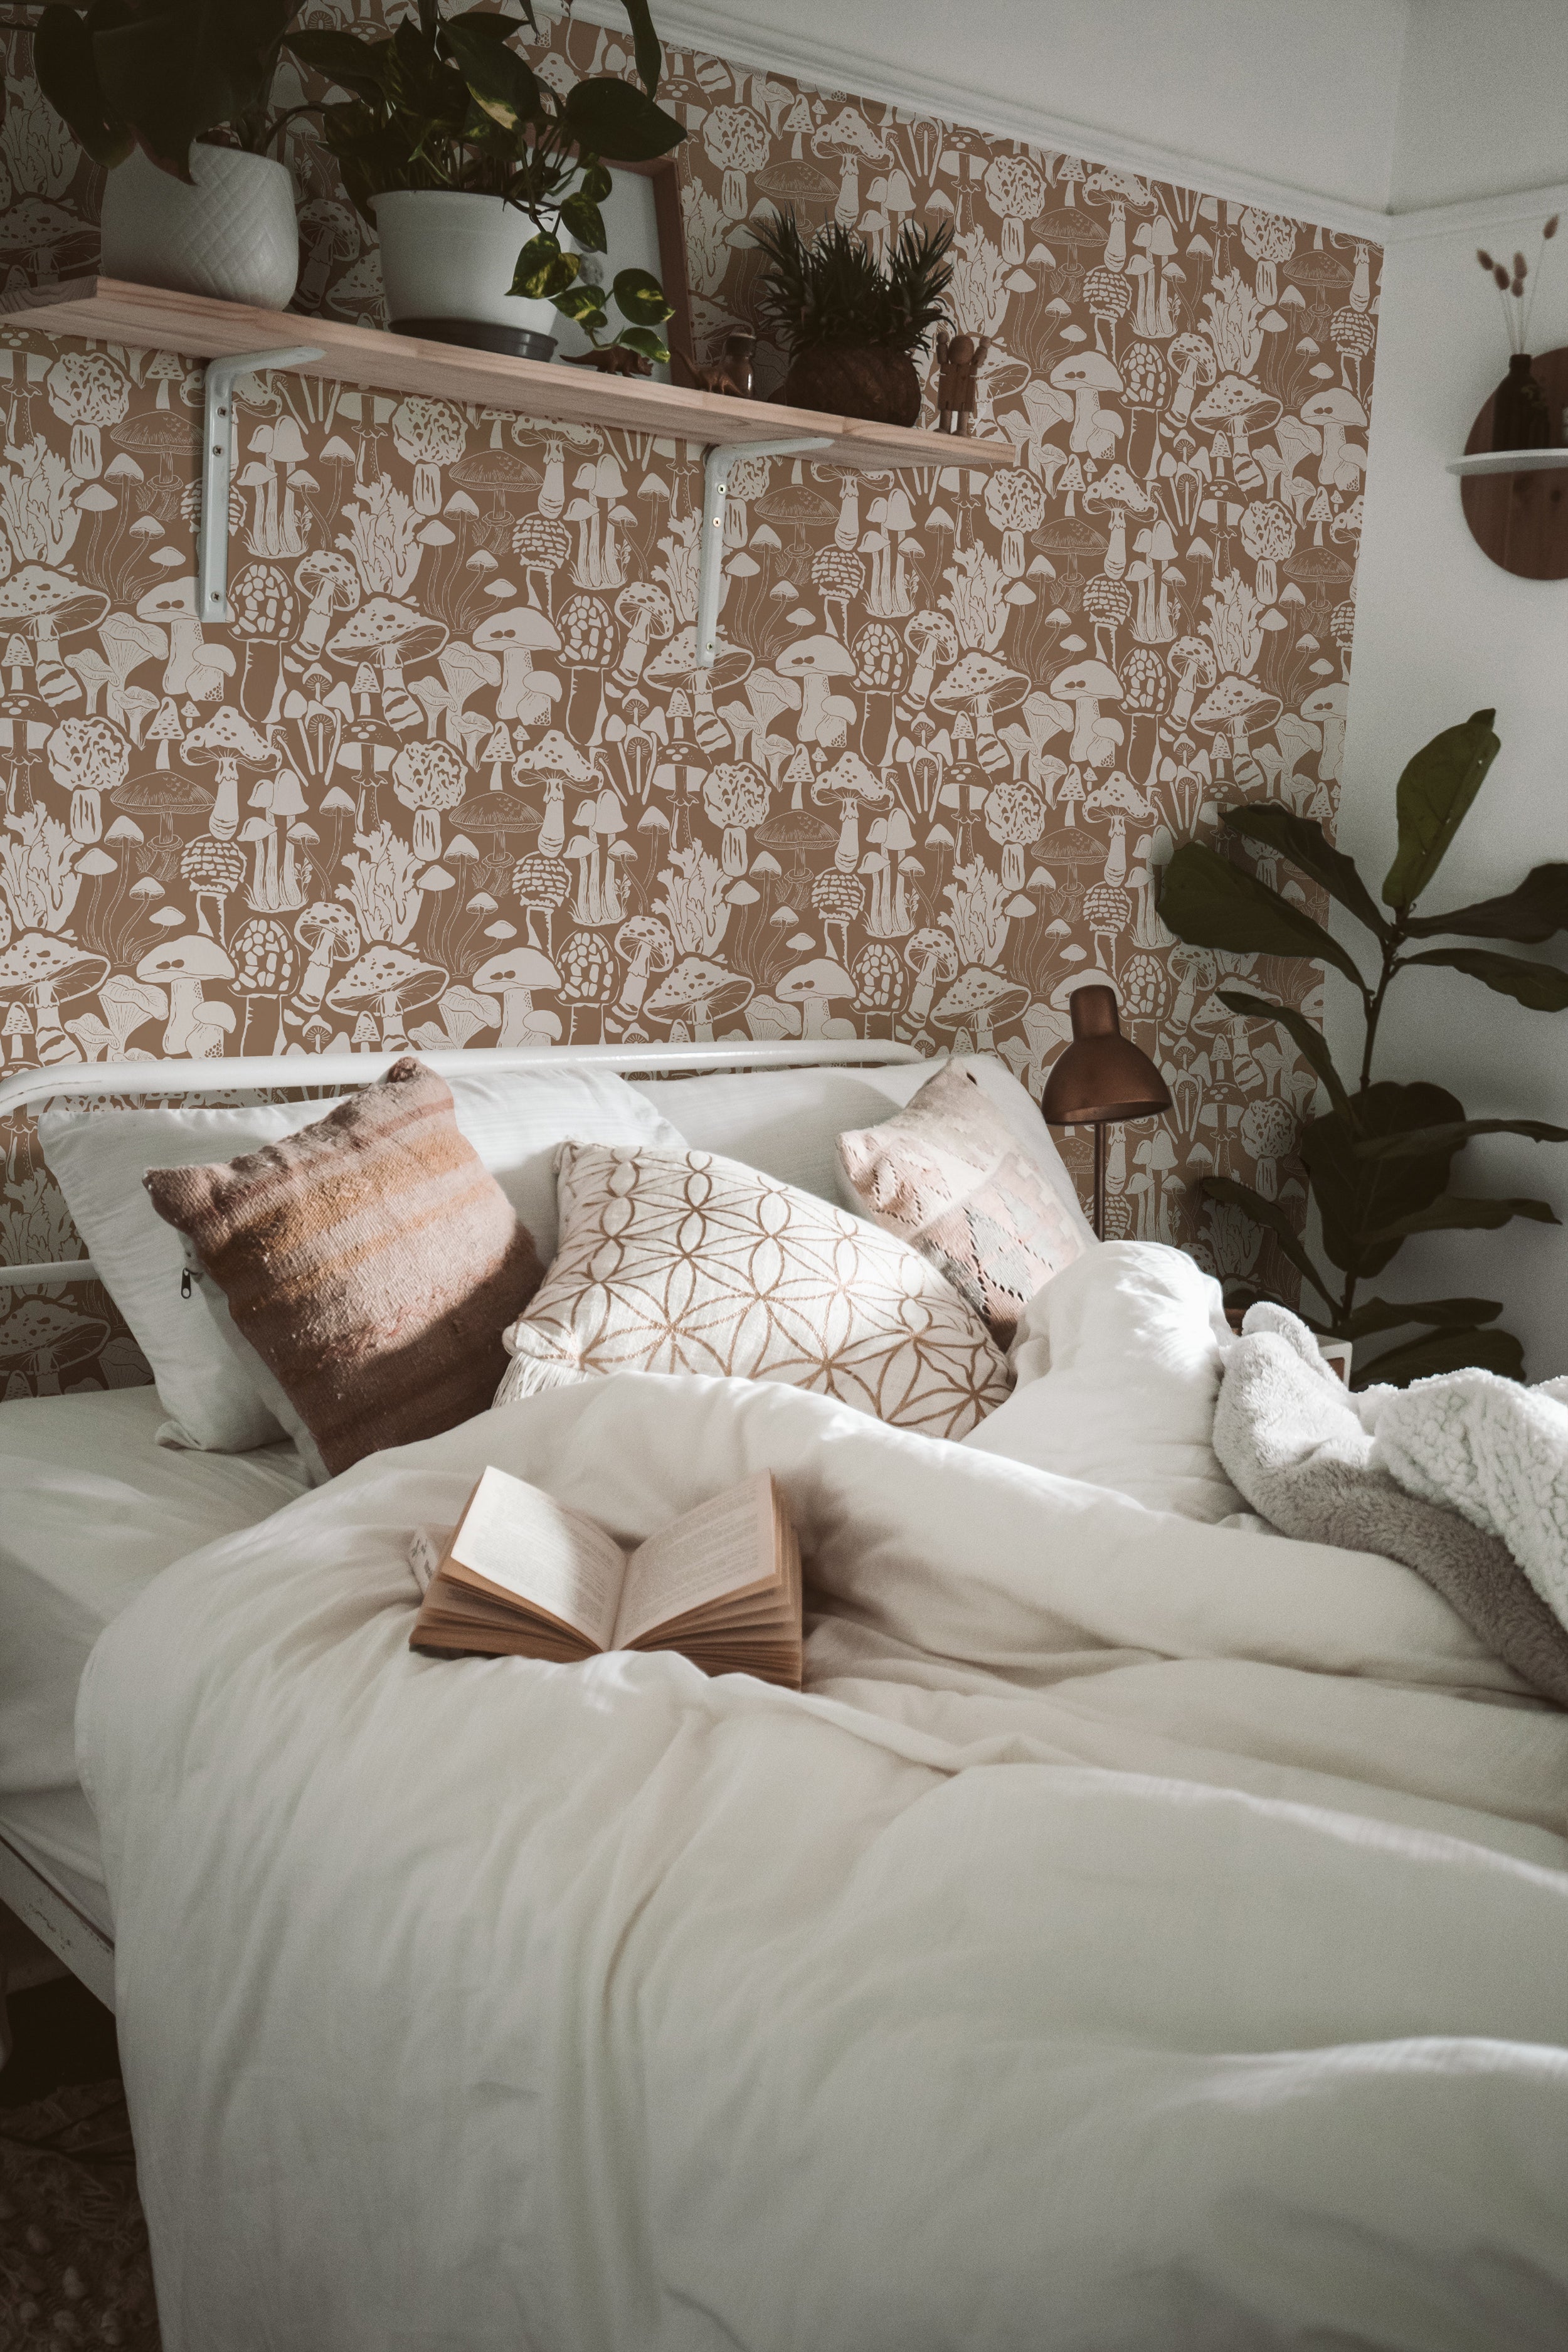 A tranquil bedroom featuring a wall adorned with a whimsical mushroom-patterned wallpaper in shades of brown and cream, creating a nature-inspired retreat, complemented by houseplants and cozy bedding.